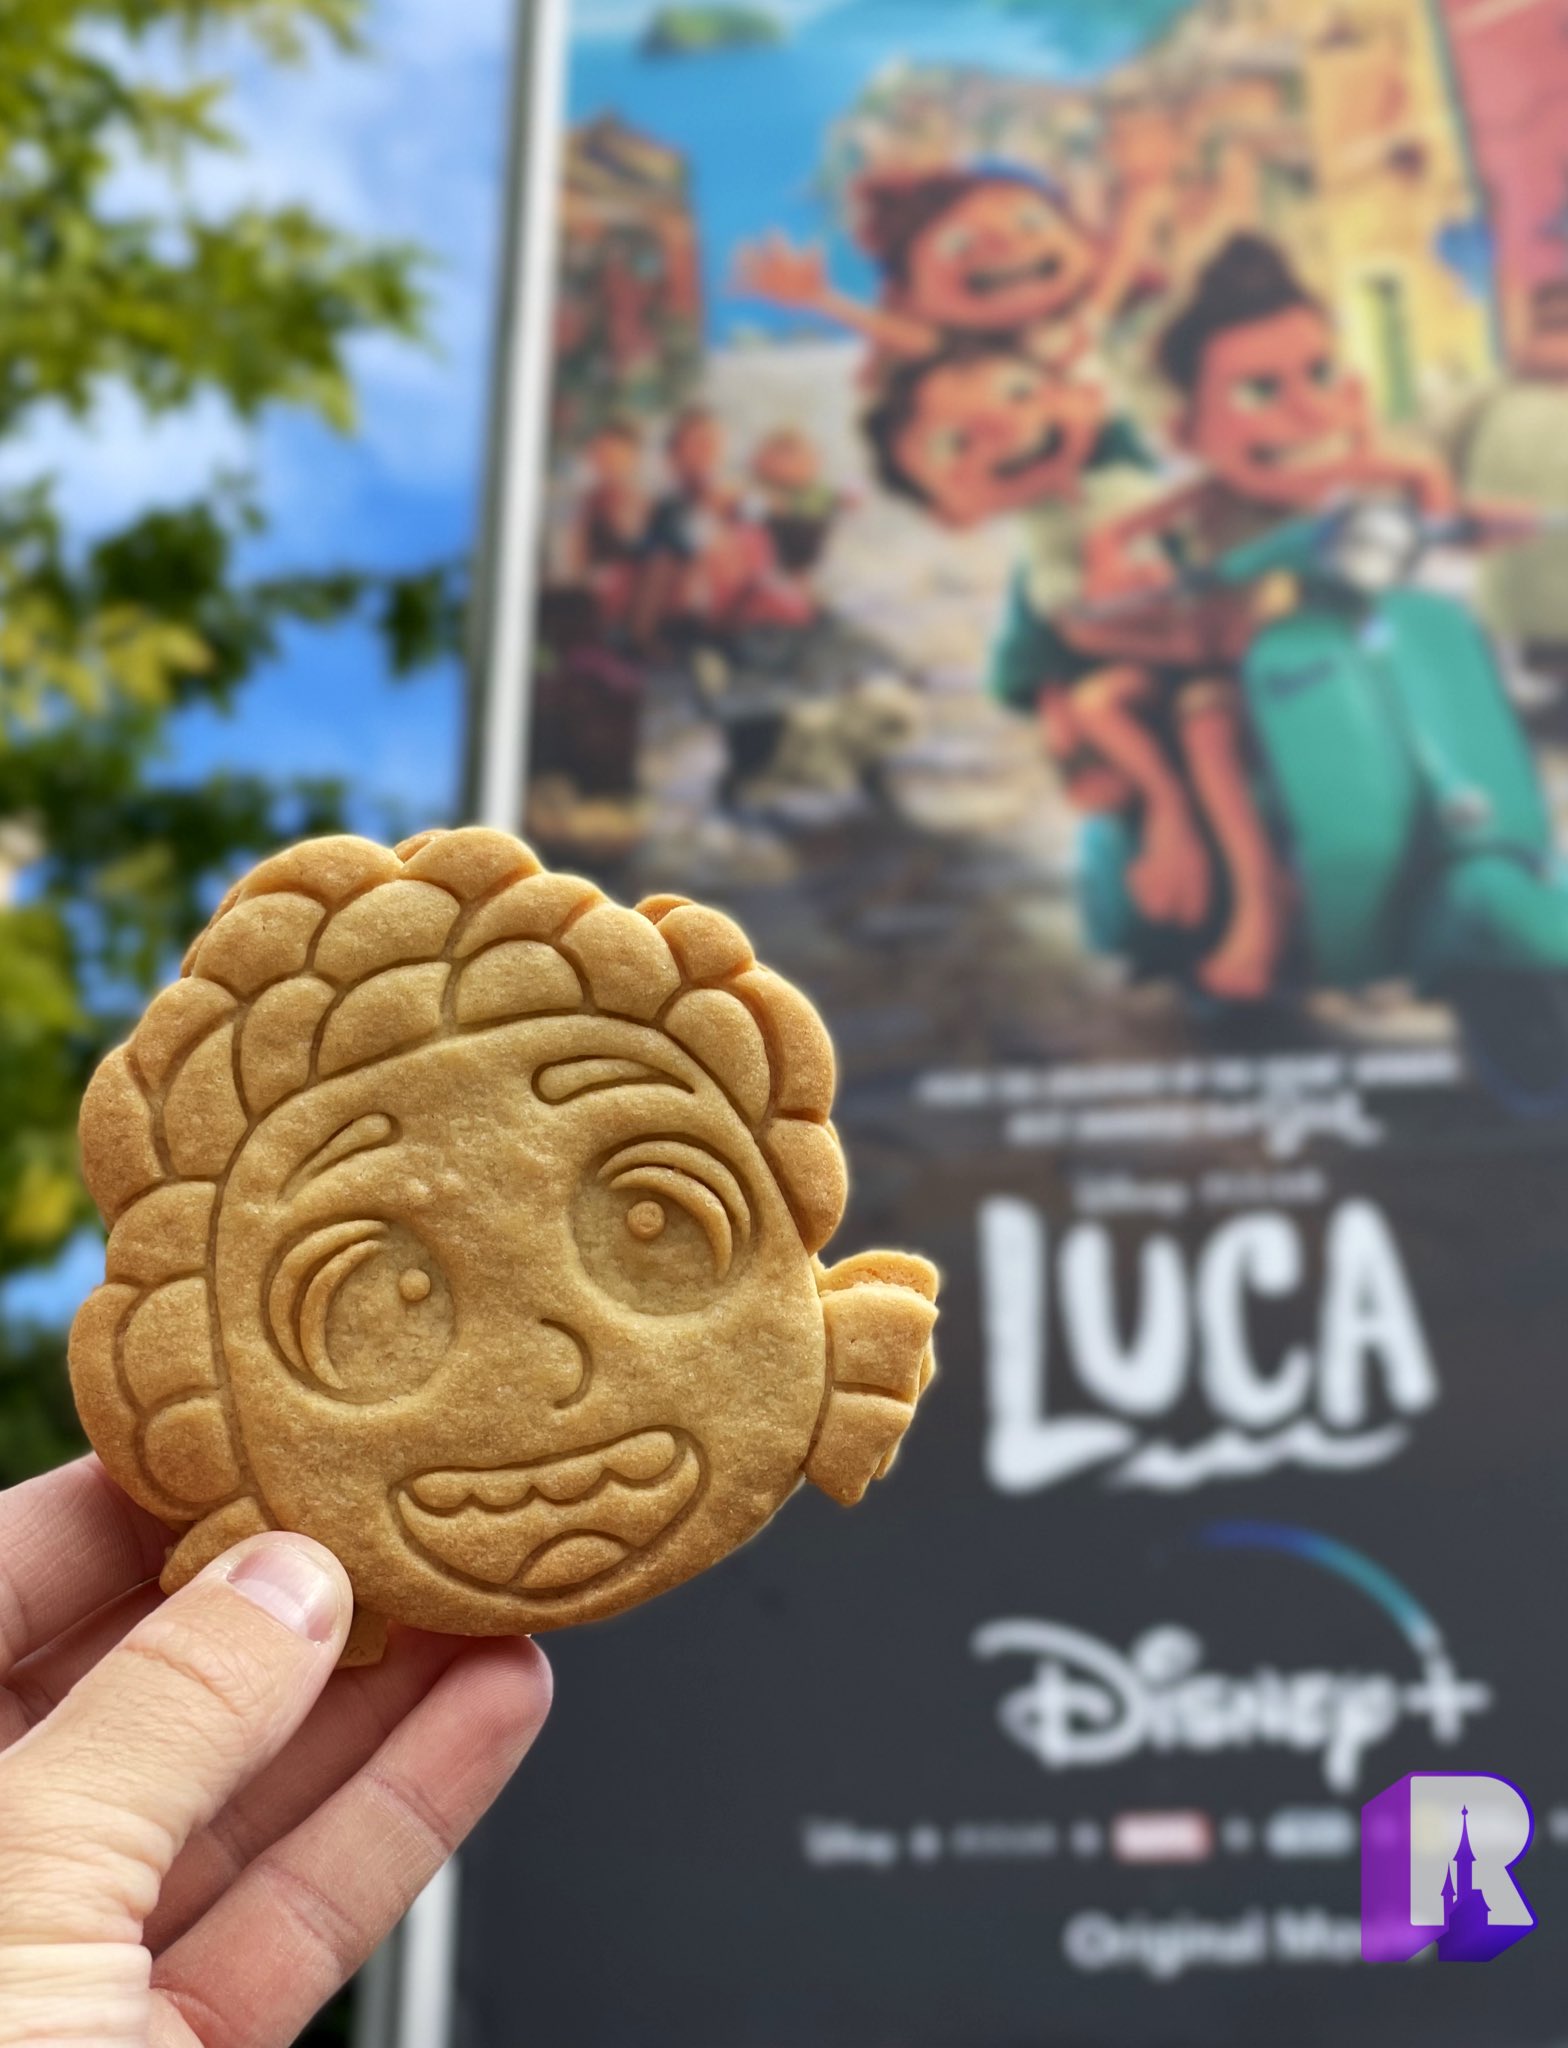 DLP Report on X: New “Luca” Nutella shortbread cookie, to kick